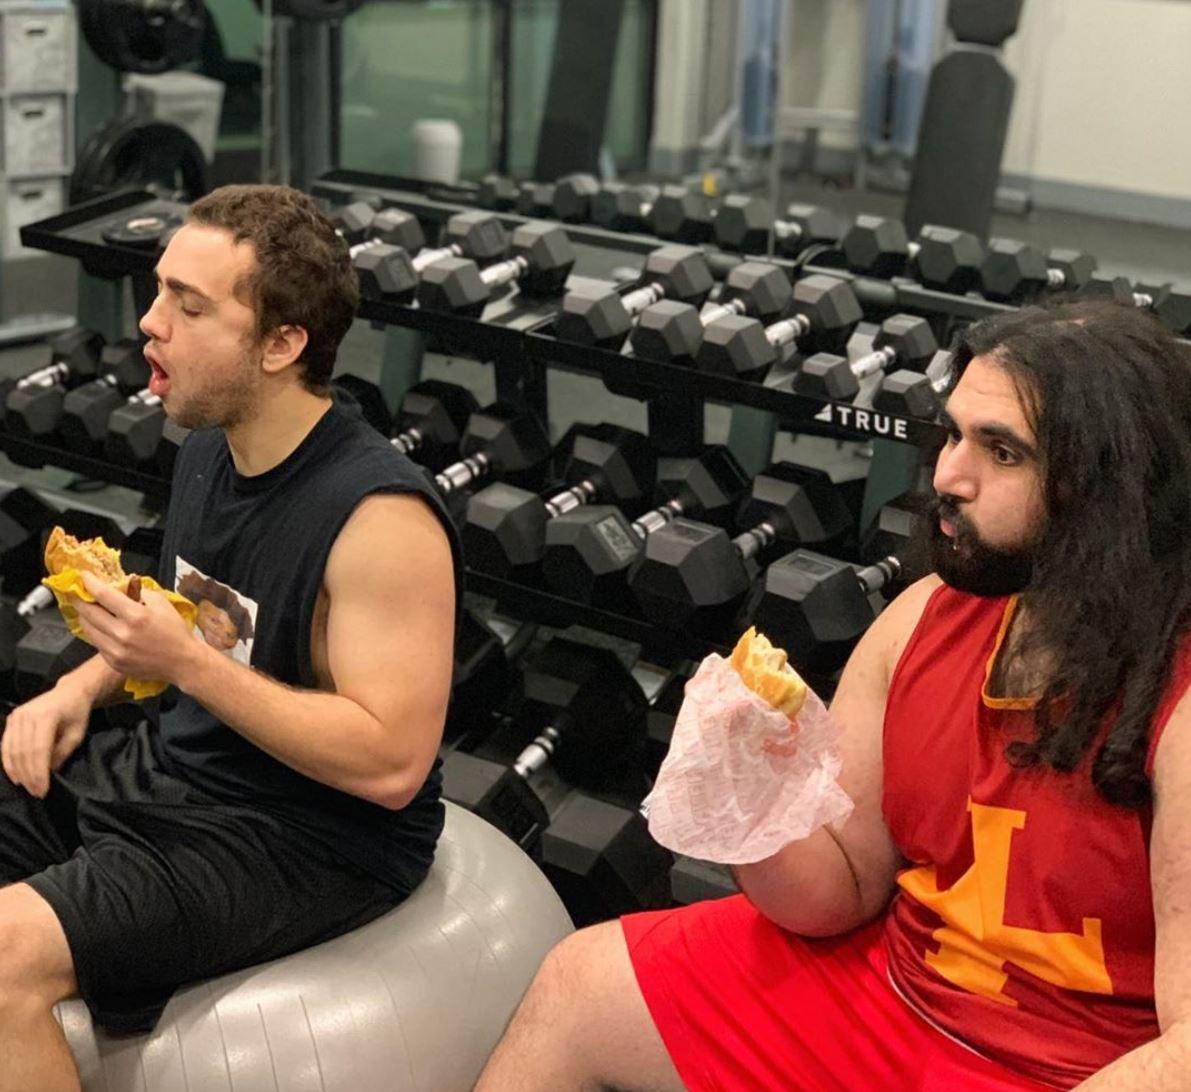 Esfand and Mizkif eat burgers at the gym.